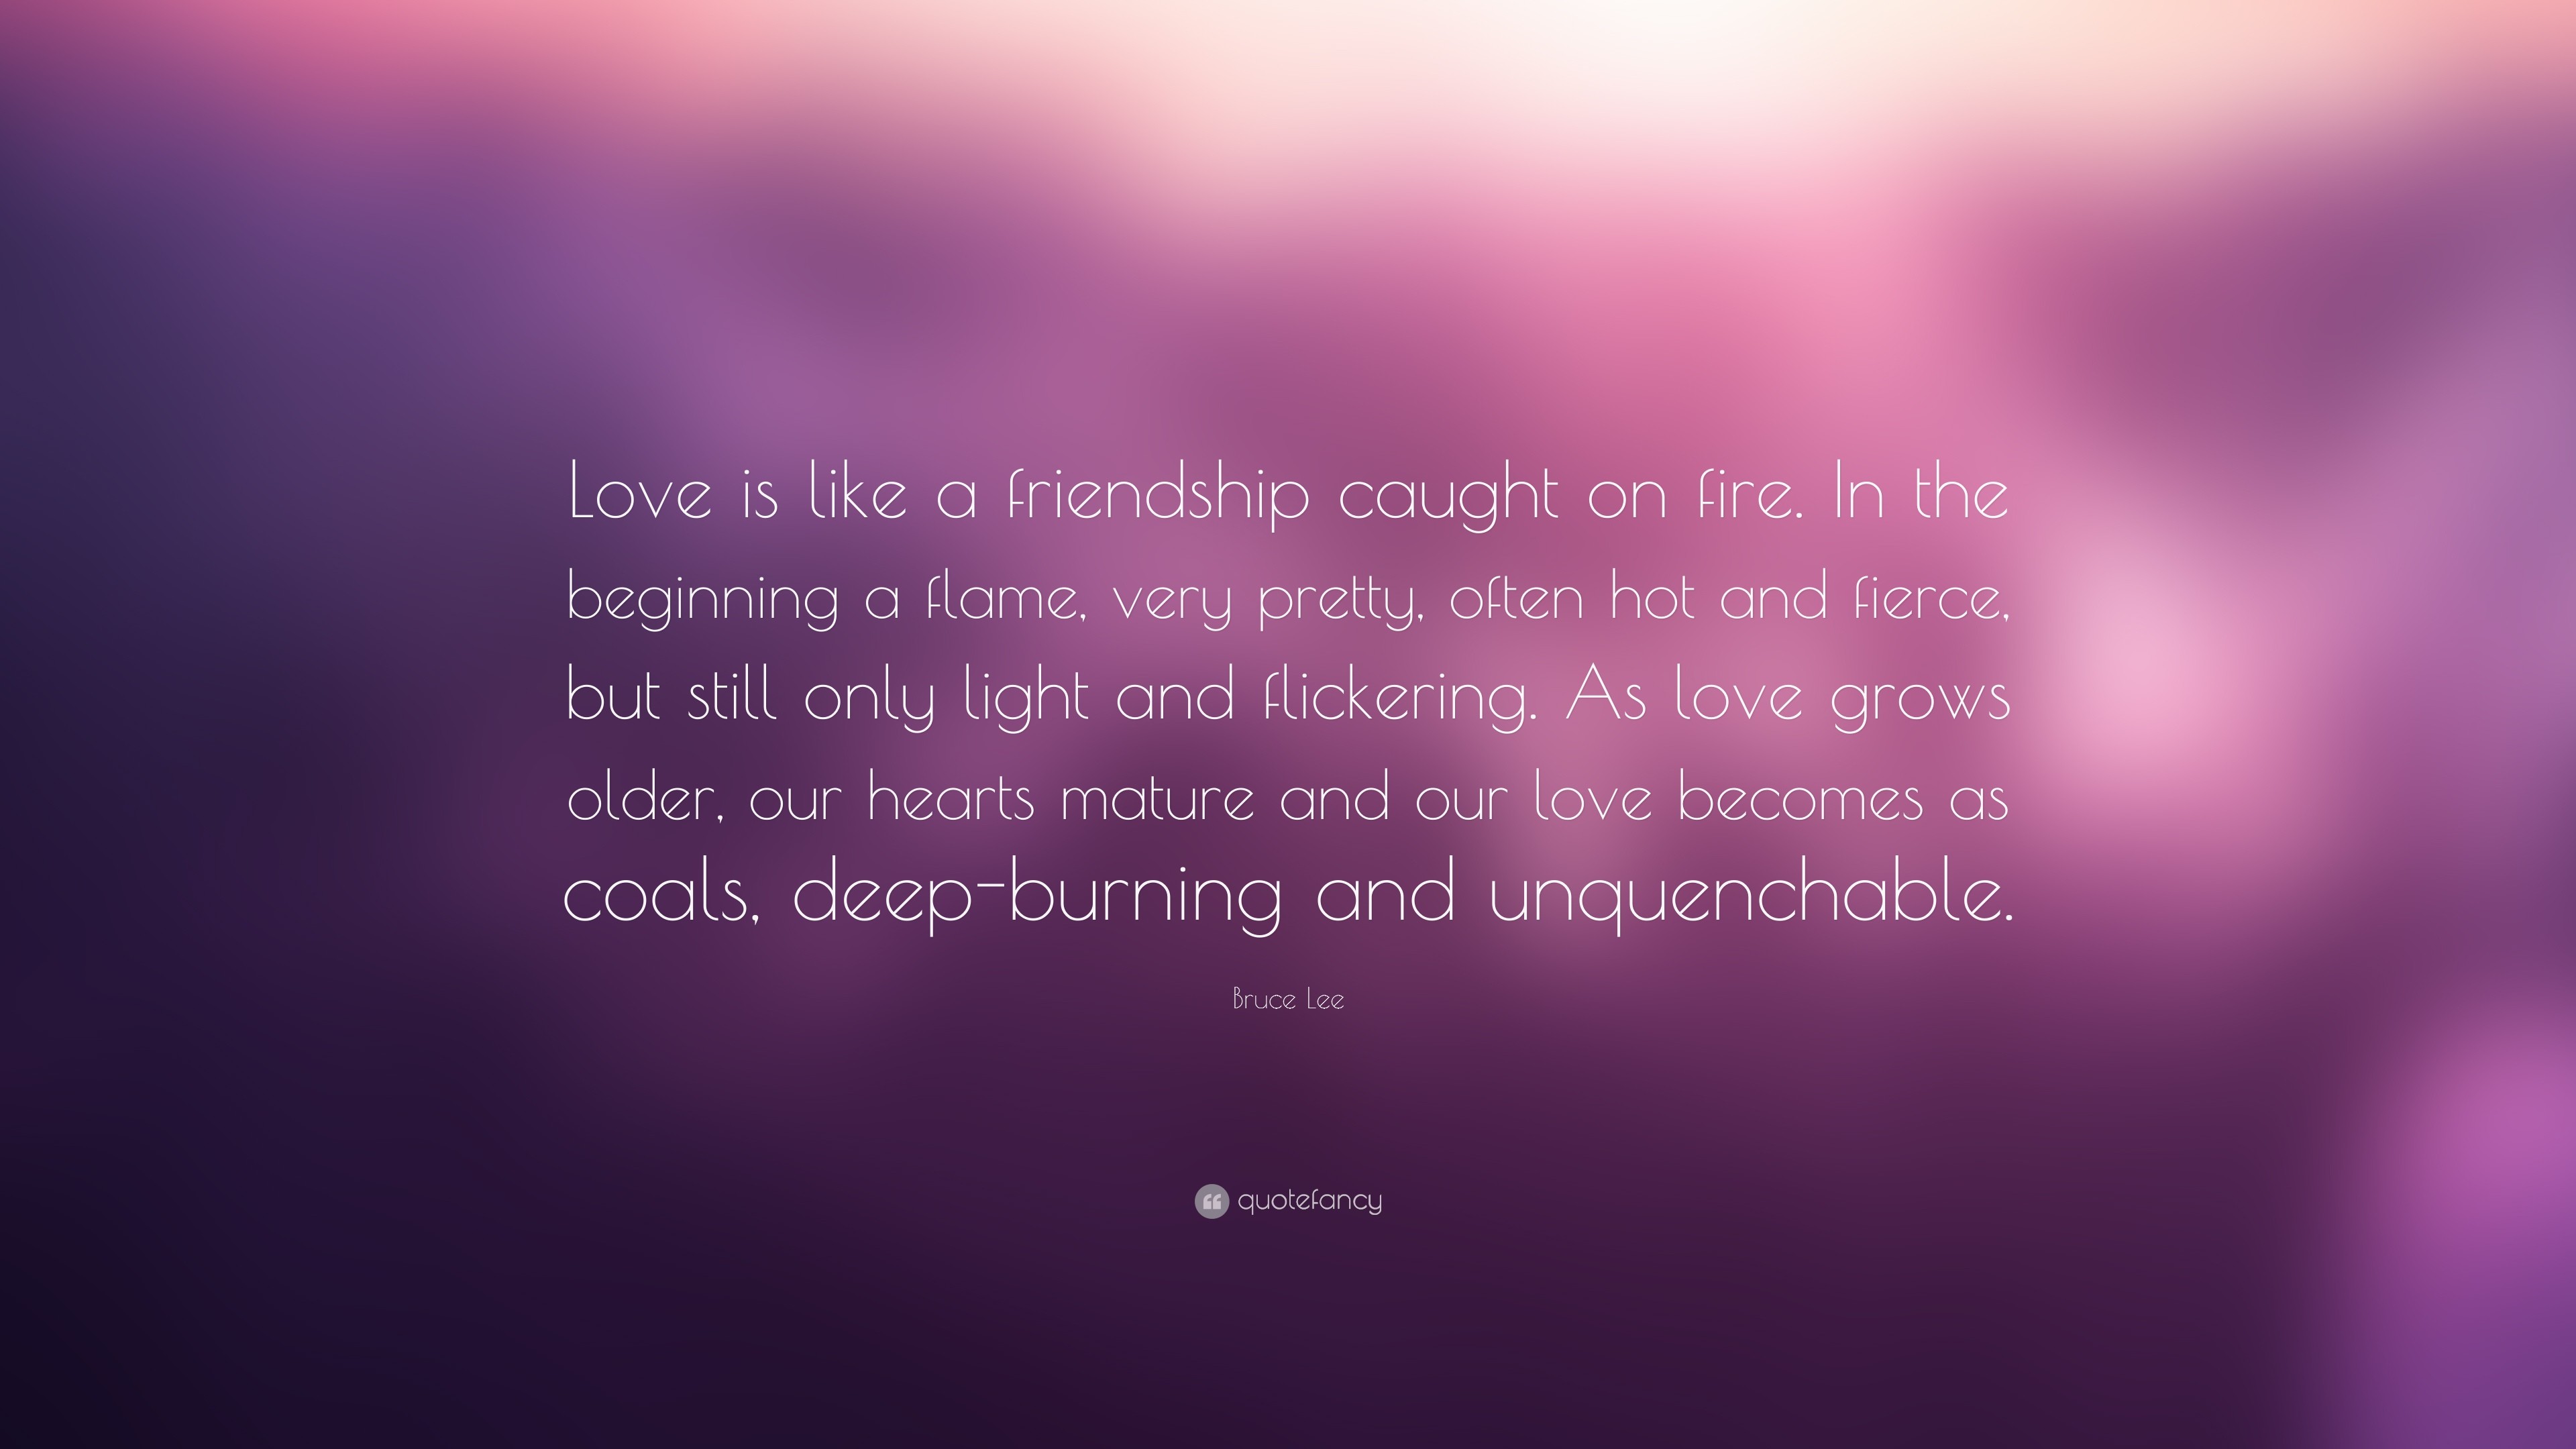 Bruce Lee Quote Love is like a friendship caught on fire. In the